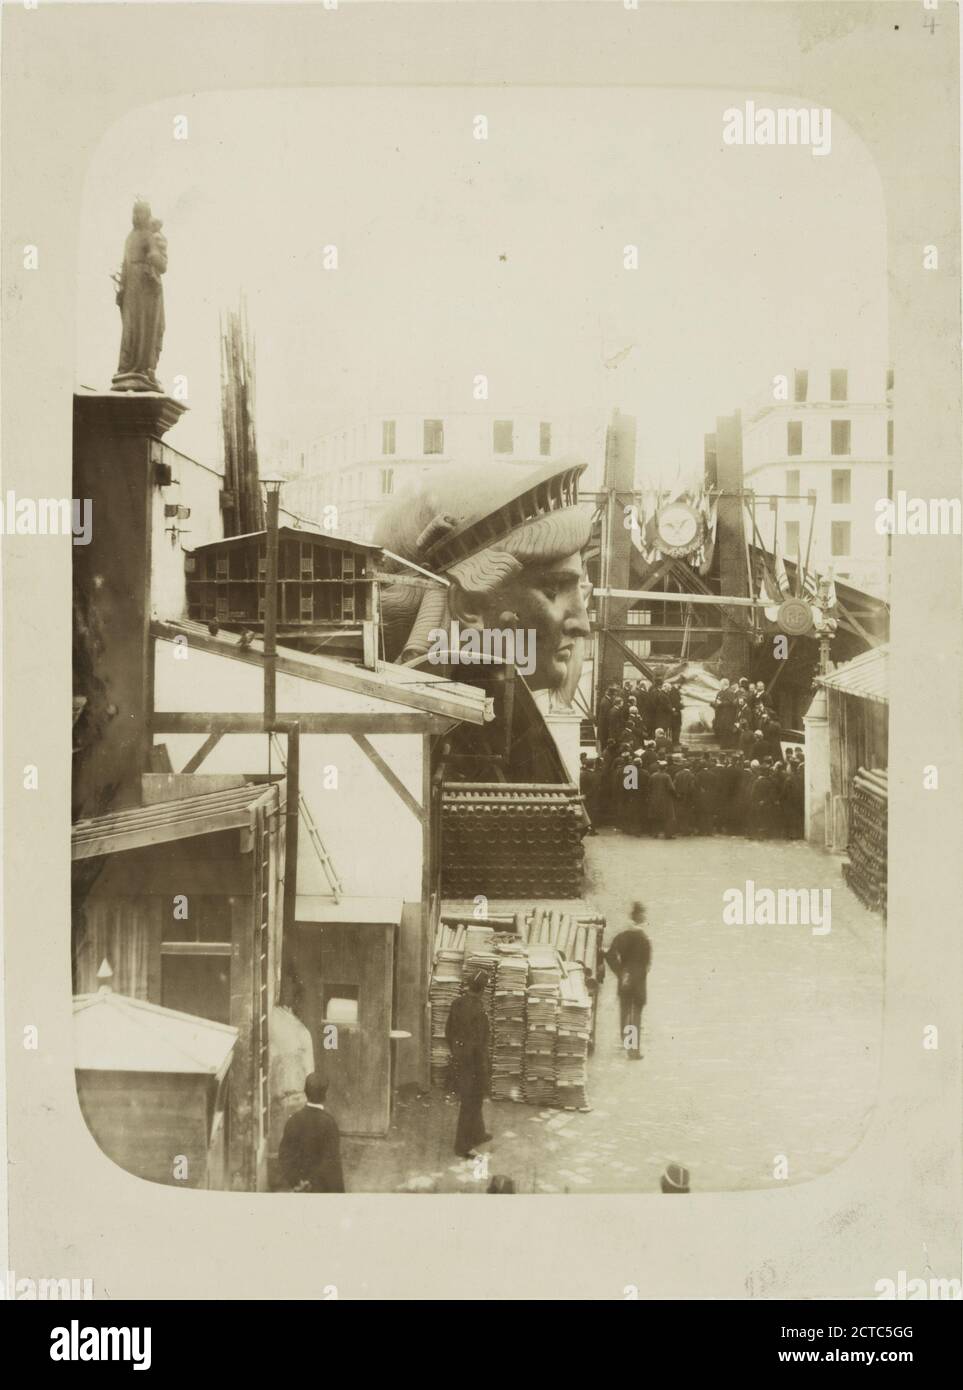 View of the external area of the workshop in Paris, showing construction materials, the head of the Statue of Liberty, and a group of men gathered in front of the left foot of the statue., still image, Photographs, 1883, Fernique, Albert, 1841-1898 Stock Photo